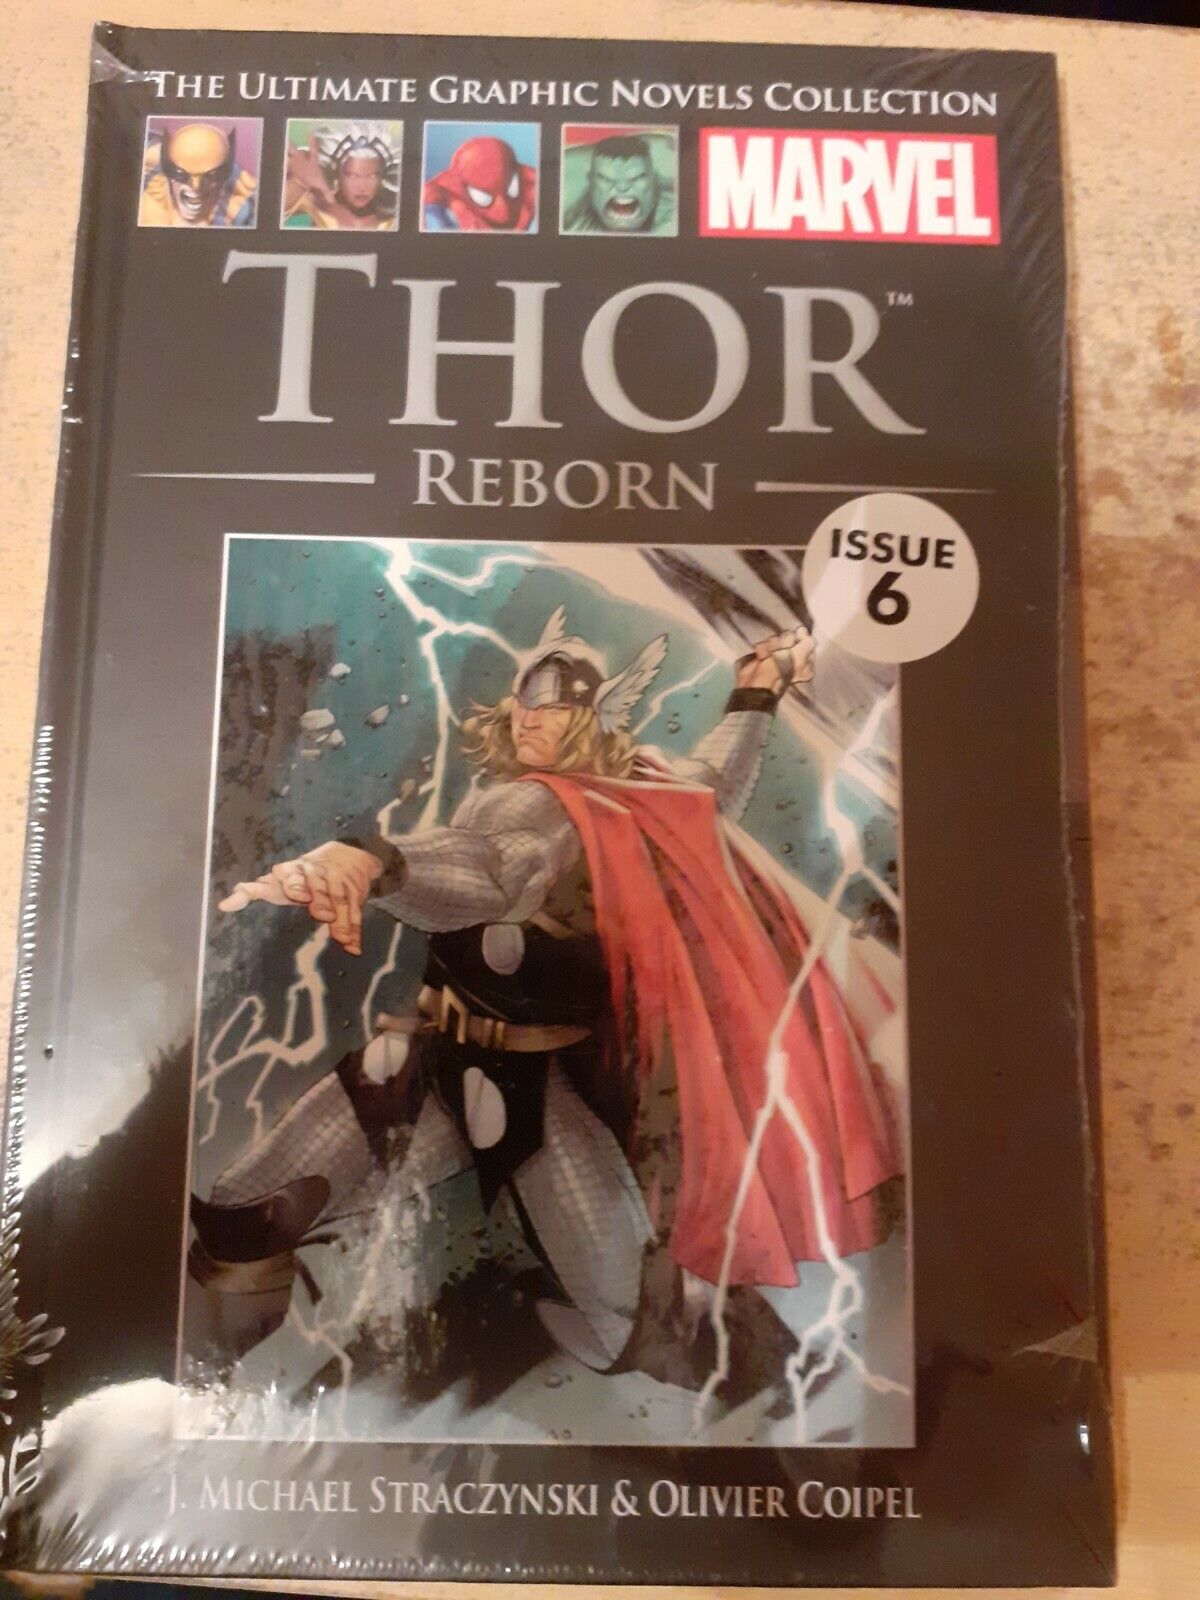 Marvel The Ultimate Graphic Novels Collection No. 52 Thor Reborn